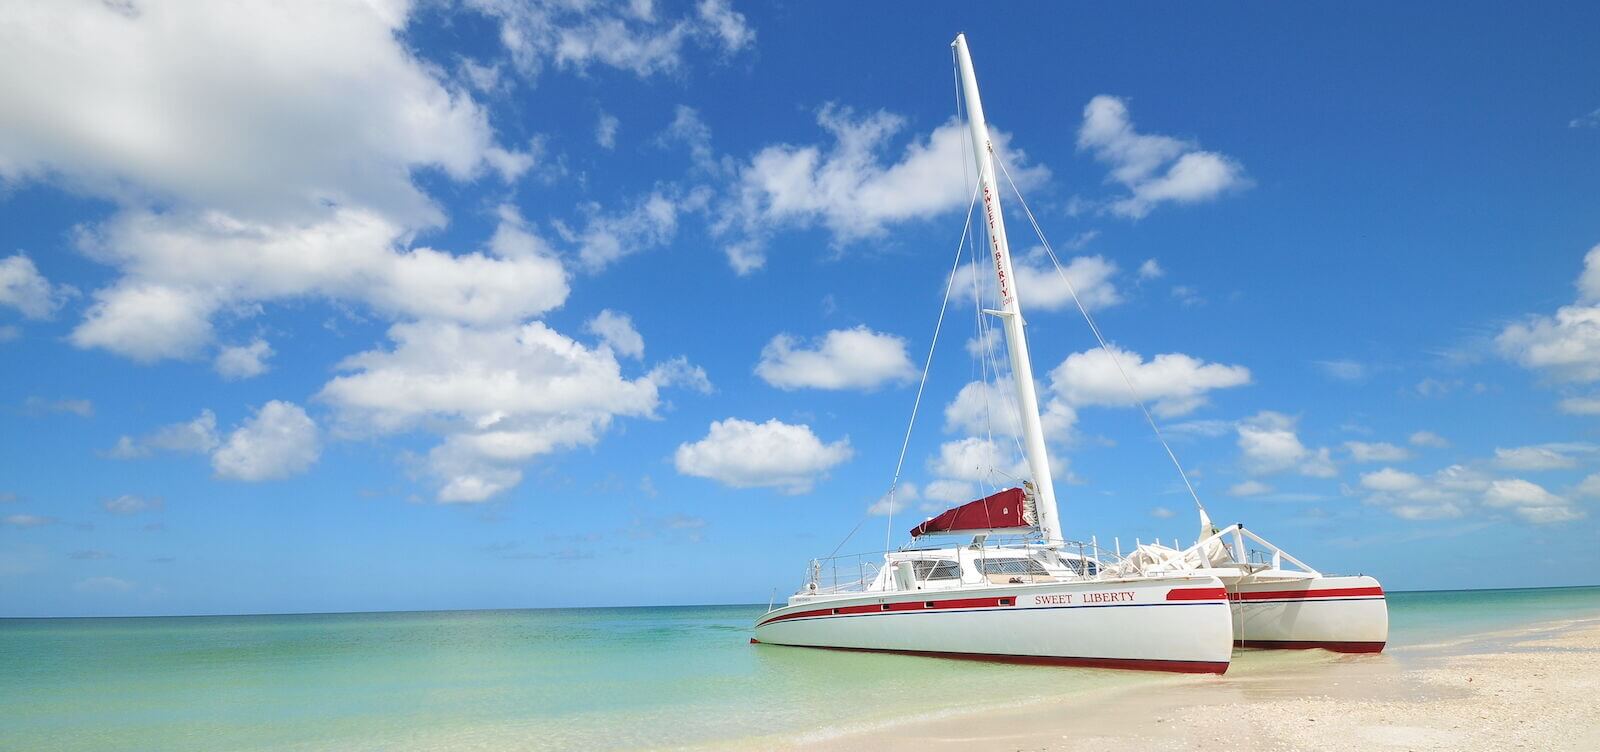 Sweet Liberty charter sail boat on white sand beach in Naples, Florida.